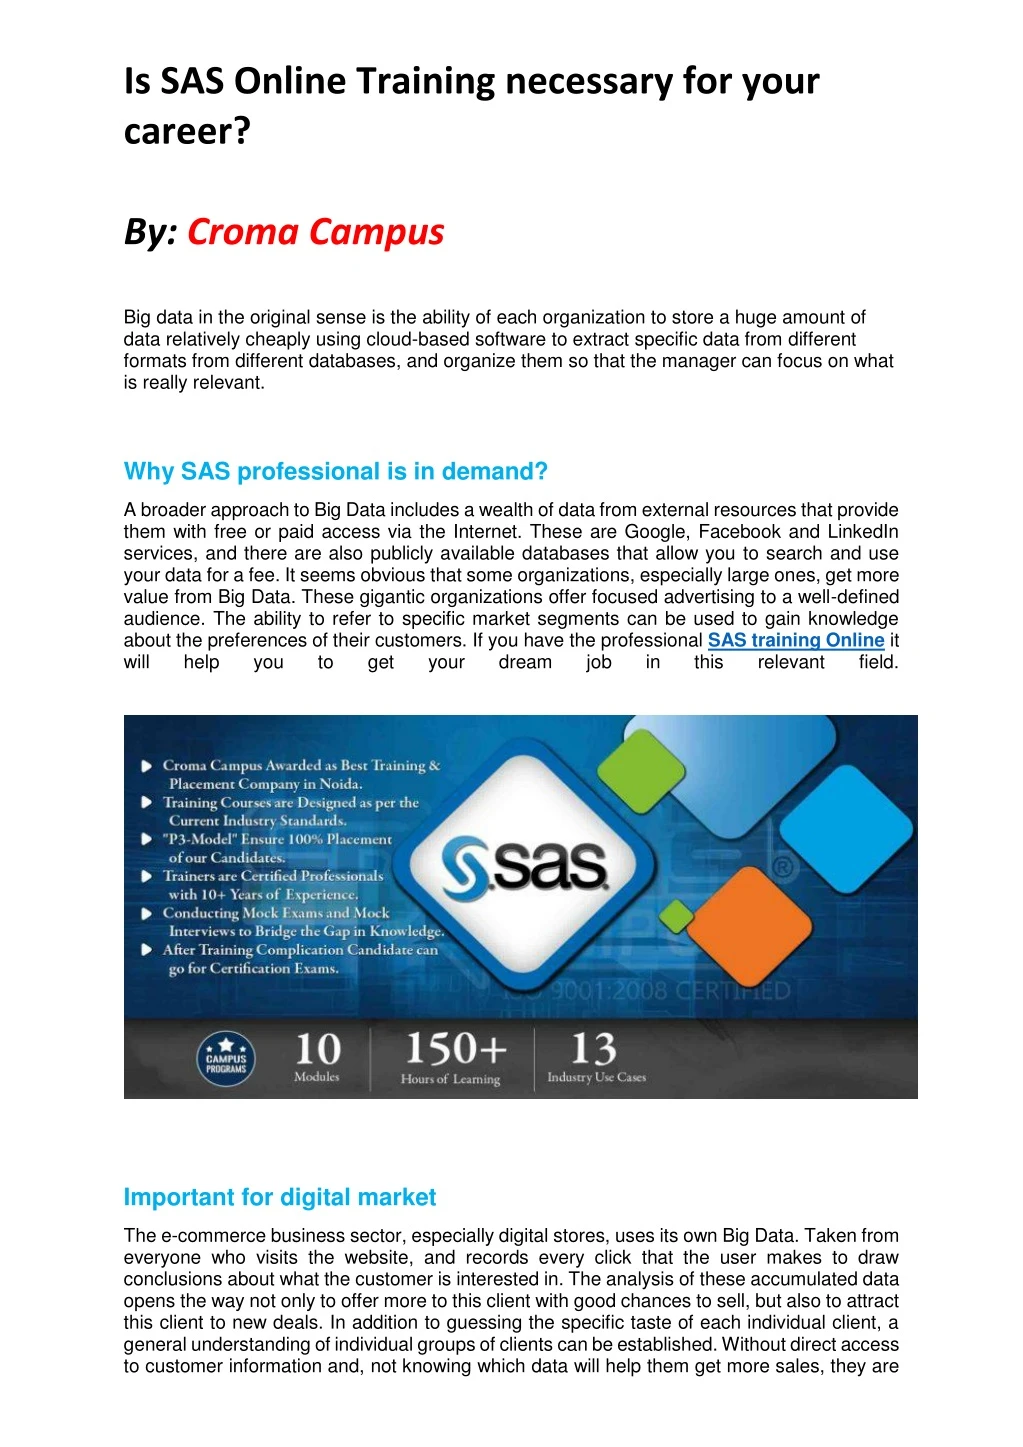 is sas online training necessary for your career